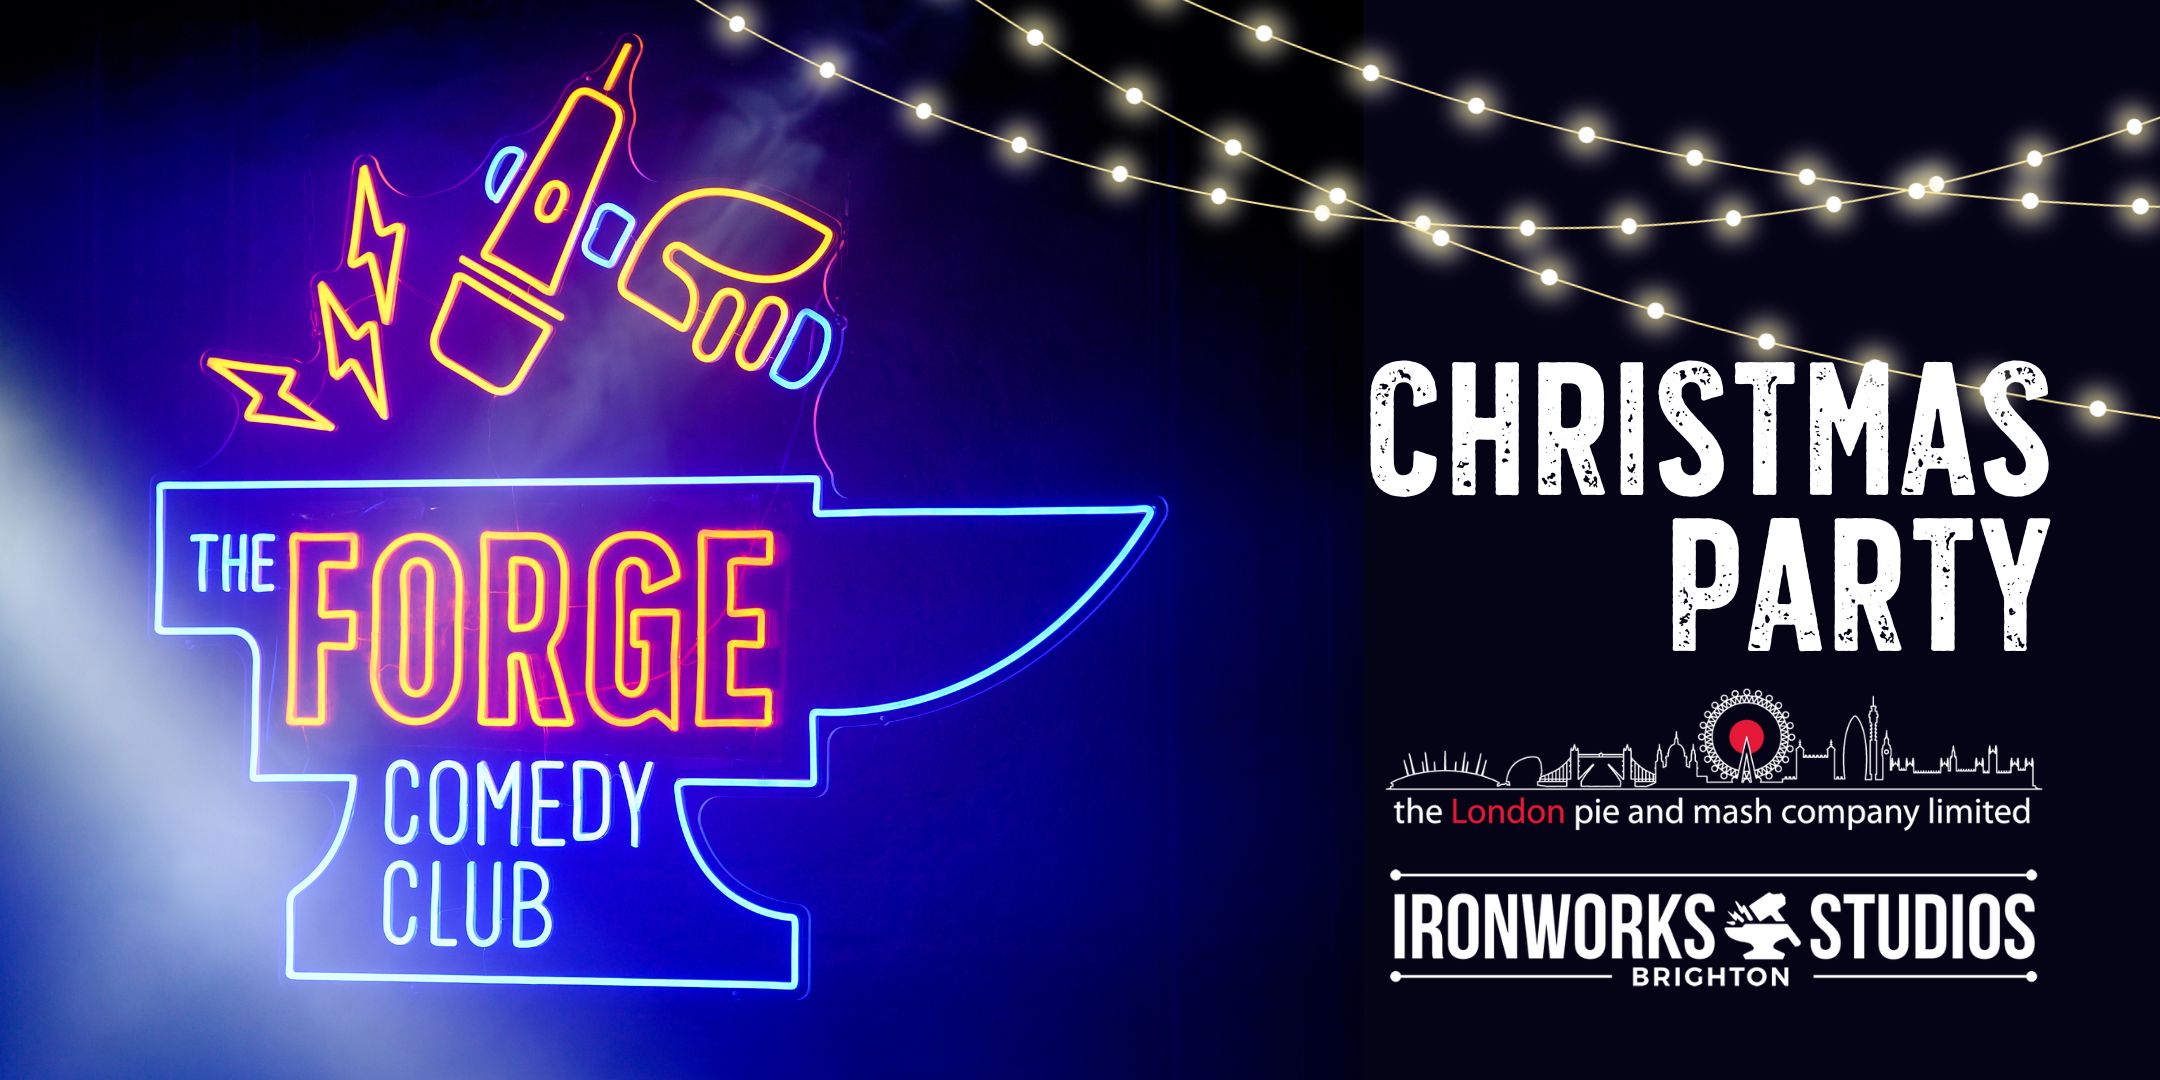 2nd December: The Forge Comedy Club Christmas Party